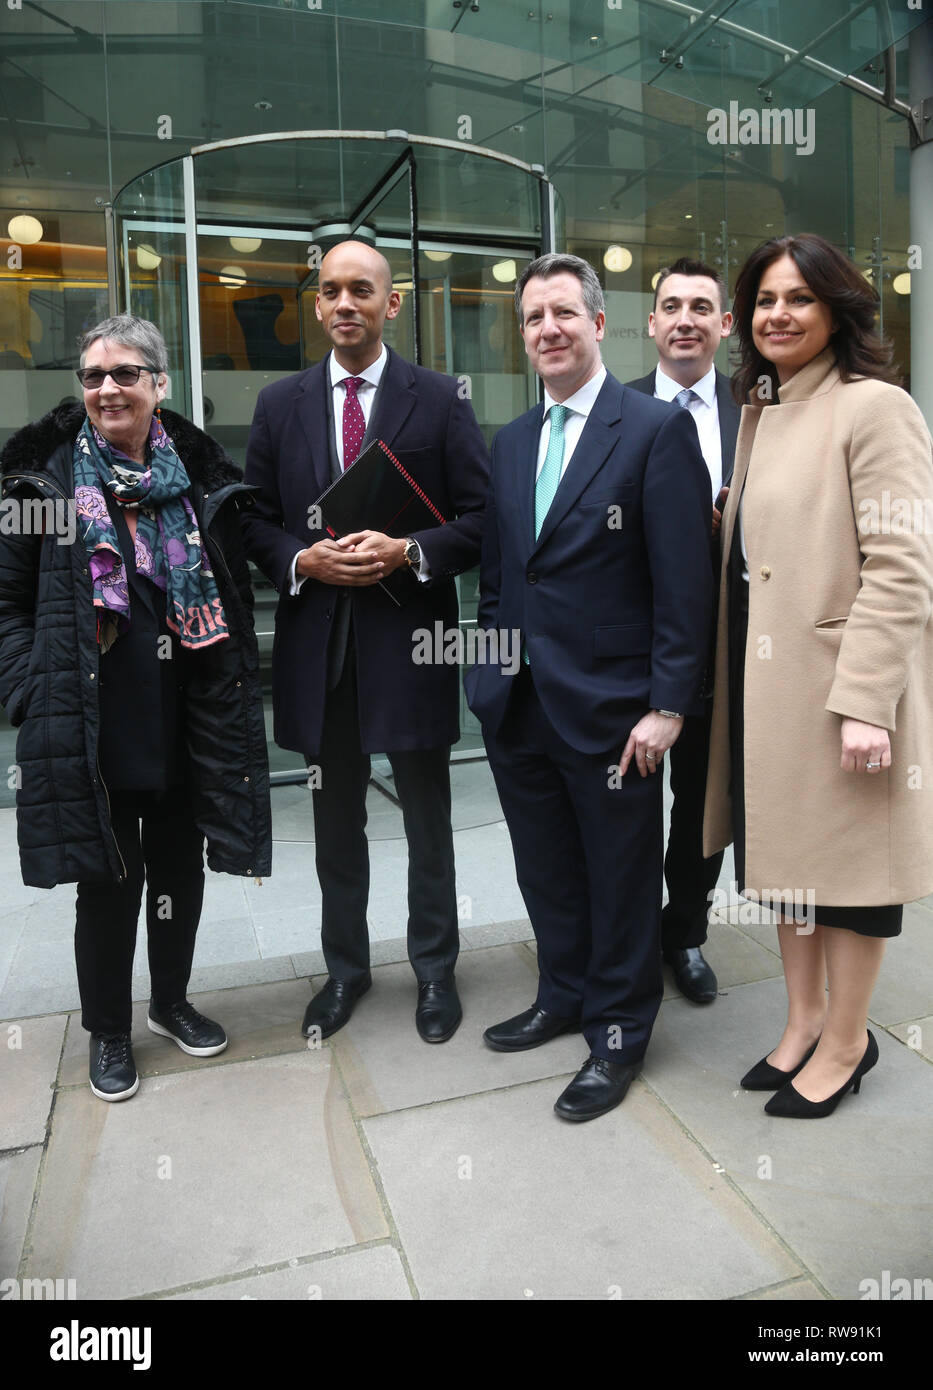 Independent Group MPs (left to right) Ann Coffey, Chuka Umunna, Chris Leslie, Gavin Shuker and Heidi Allen, speaking to the media before entering for talks at the Electoral Commission offices in central London about becoming a fully-fledged political party. Stock Photo